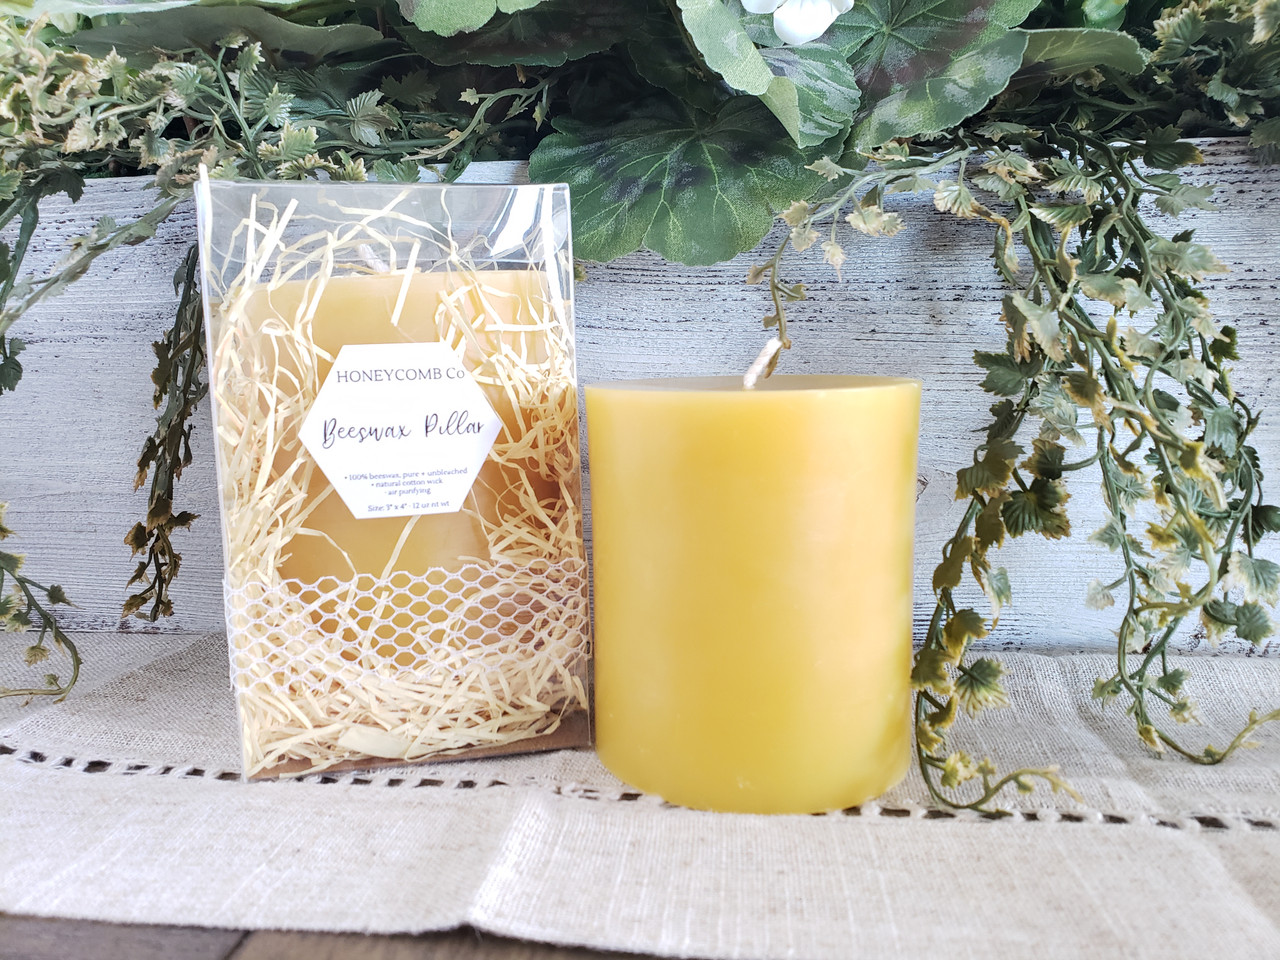 Cathedral Candle 3-Day 100% Beeswax Candles (12)